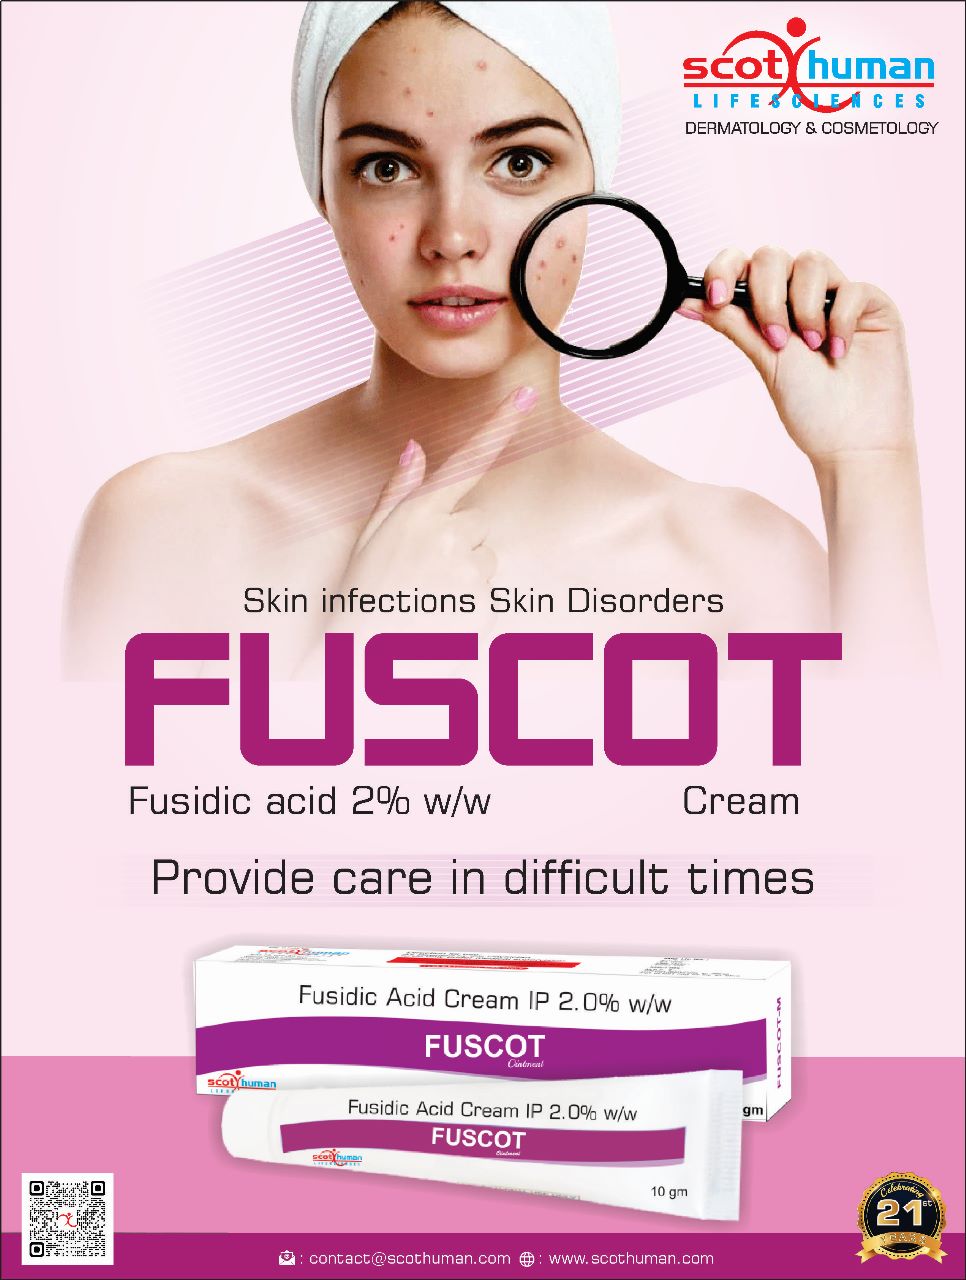 Product Name: Fuscot, Compositions of Fisidic Acid Cream IP 2.0 % w/w are Fisidic Acid Cream IP 2.0 % w/w - Pharma Drugs and Chemicals